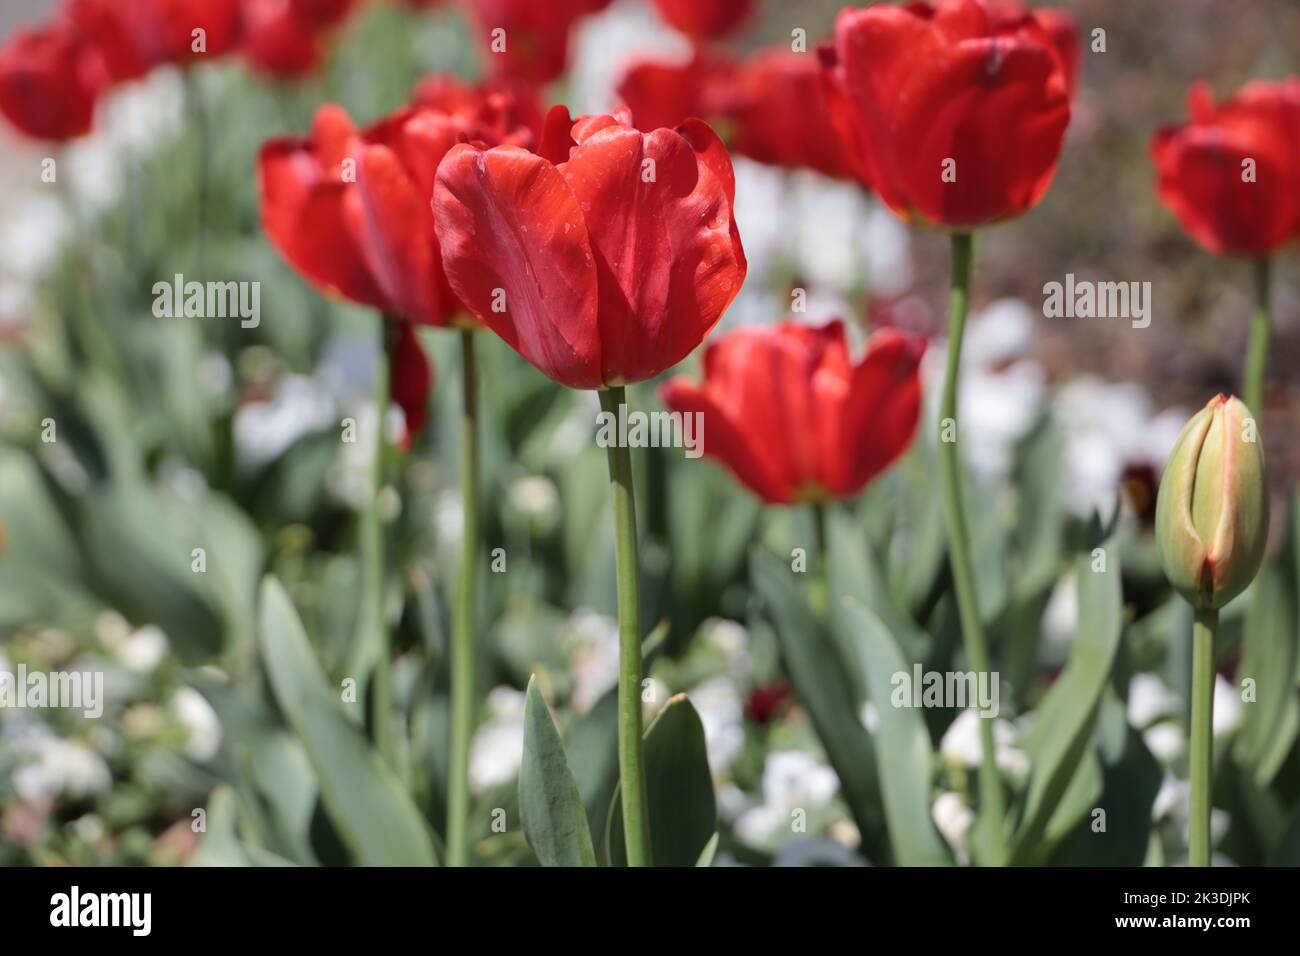 Bright red tulips growing in a large flower bed in the spring. Stock Photo